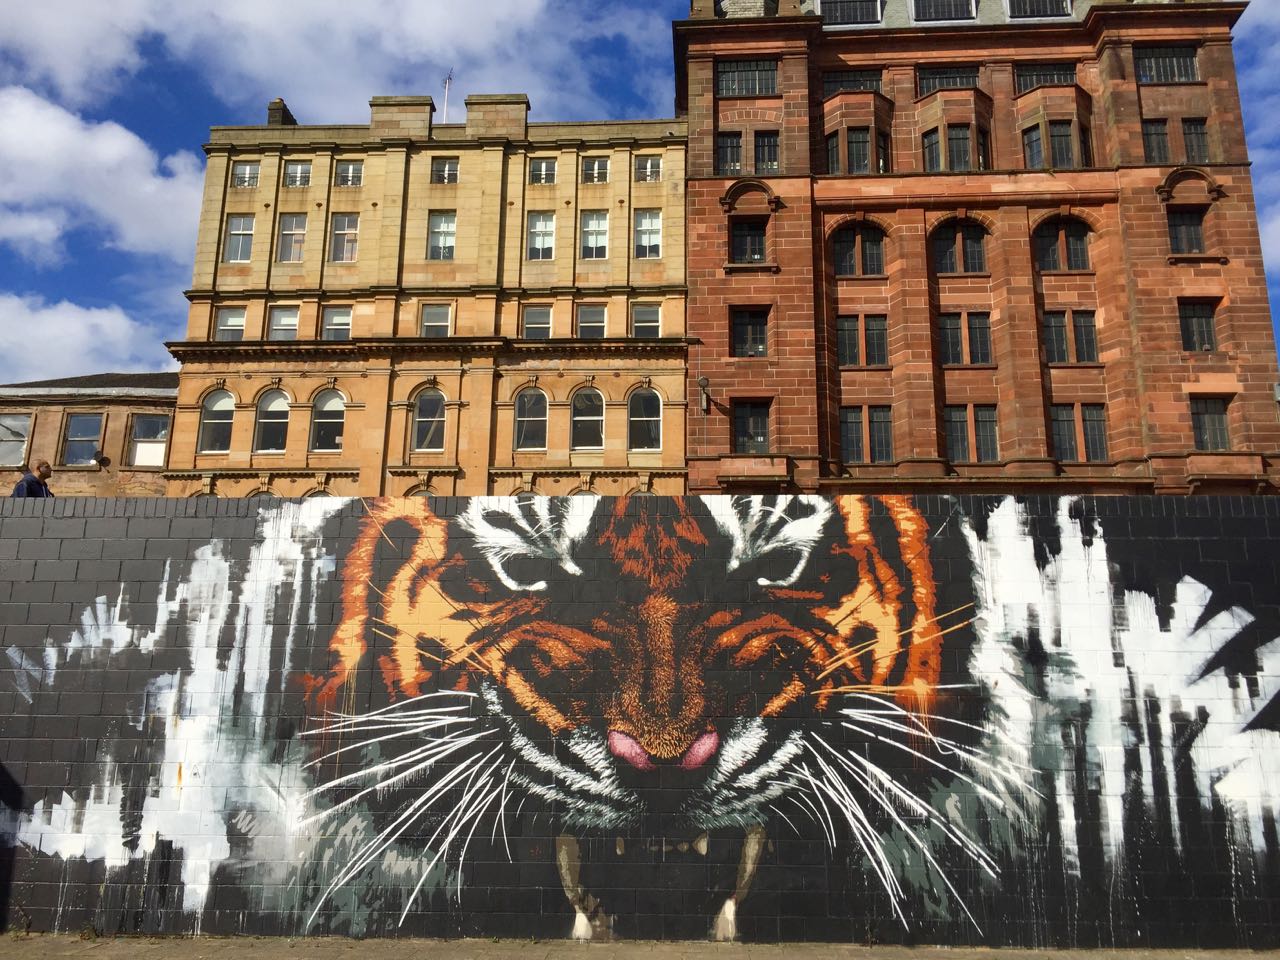 more street art, at the banks of the river Clyde